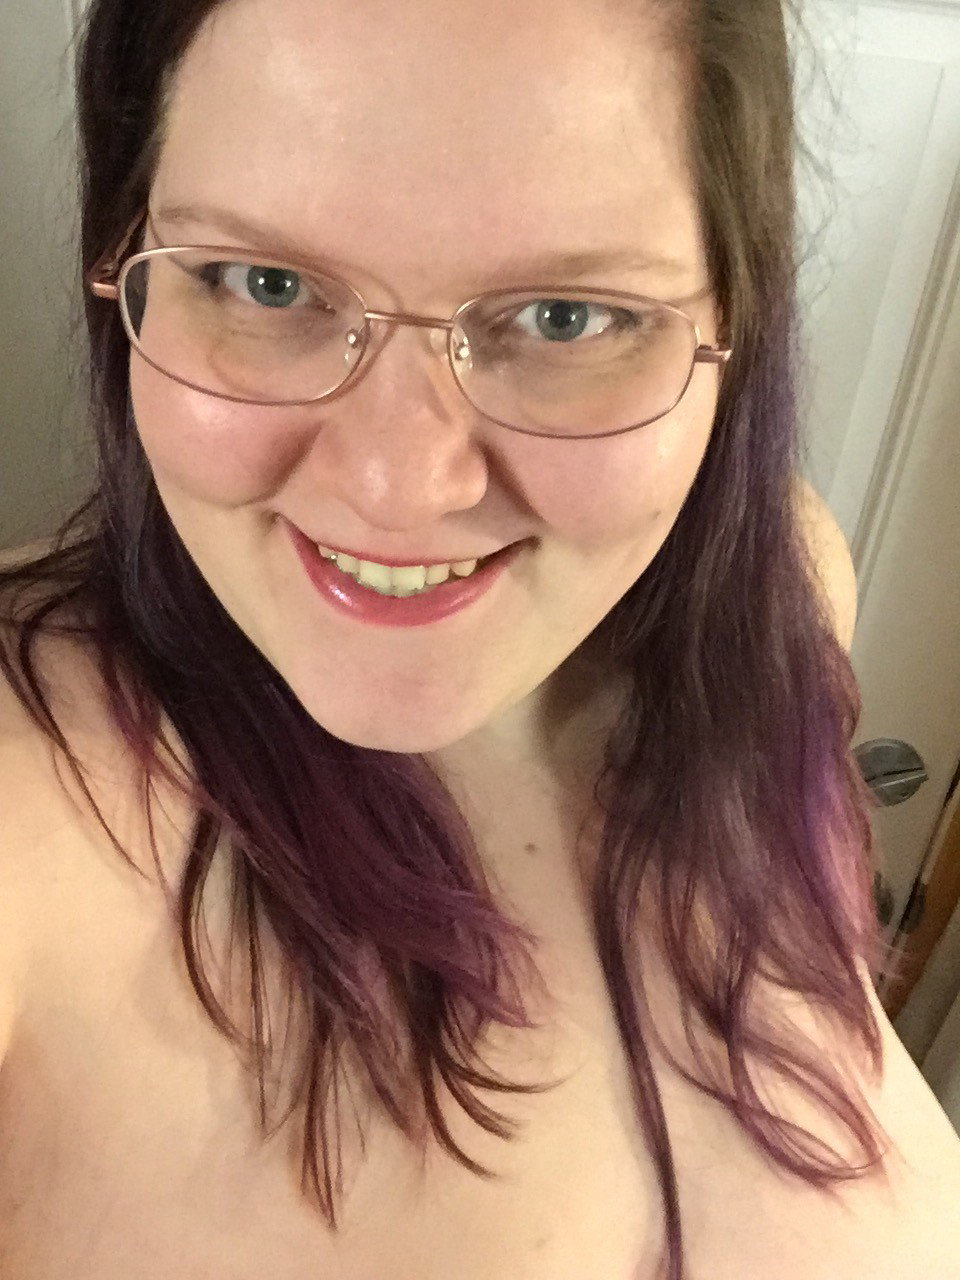 Photo by Sweettist with the username @Sweettist, who is a verified user,  December 18, 2018 at 8:41 PM. The post is about the topic BBW and the text says 'Do you fantasize about being deeply #hypnotized and only being able to say yes to a hot #bbw #dominant #femalehypnotist ?

If so, come and experience my Yes, Miss Sweet #hypnosis audiofile and feel the #pleasure of saying “Yes”...'